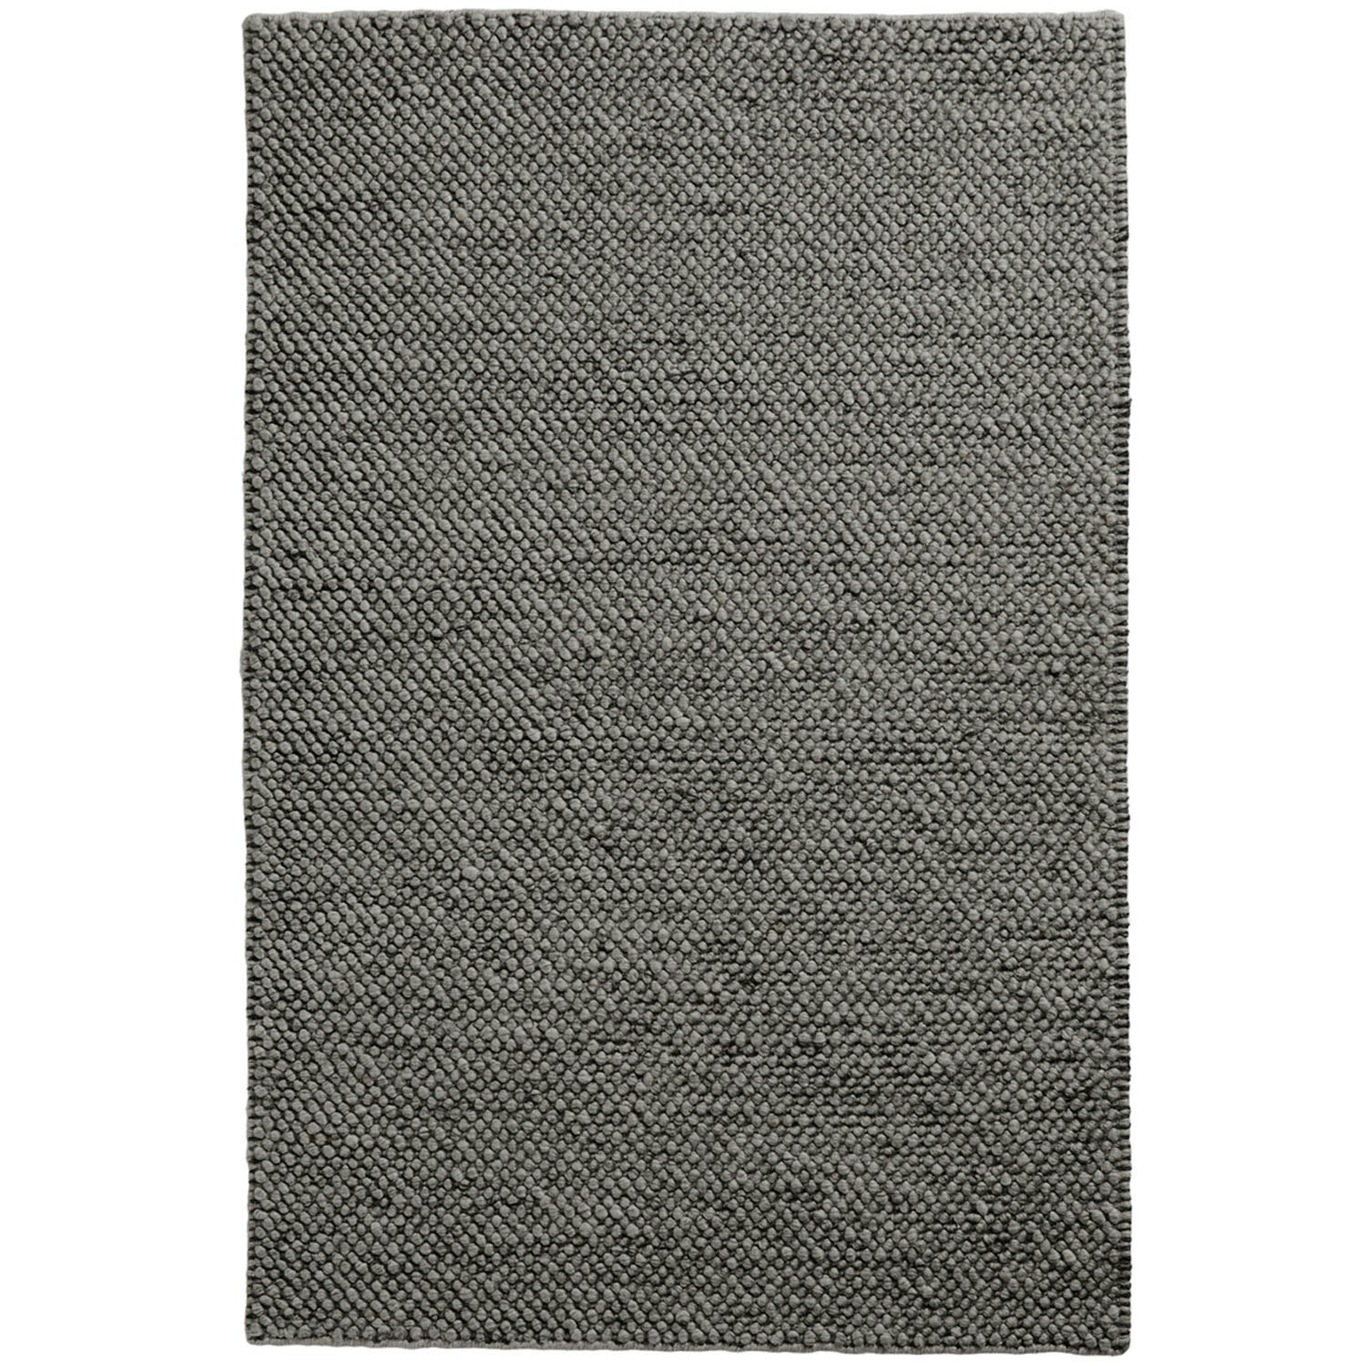 Tact Teppe Ull 170x240 cm, Anthracite Grey